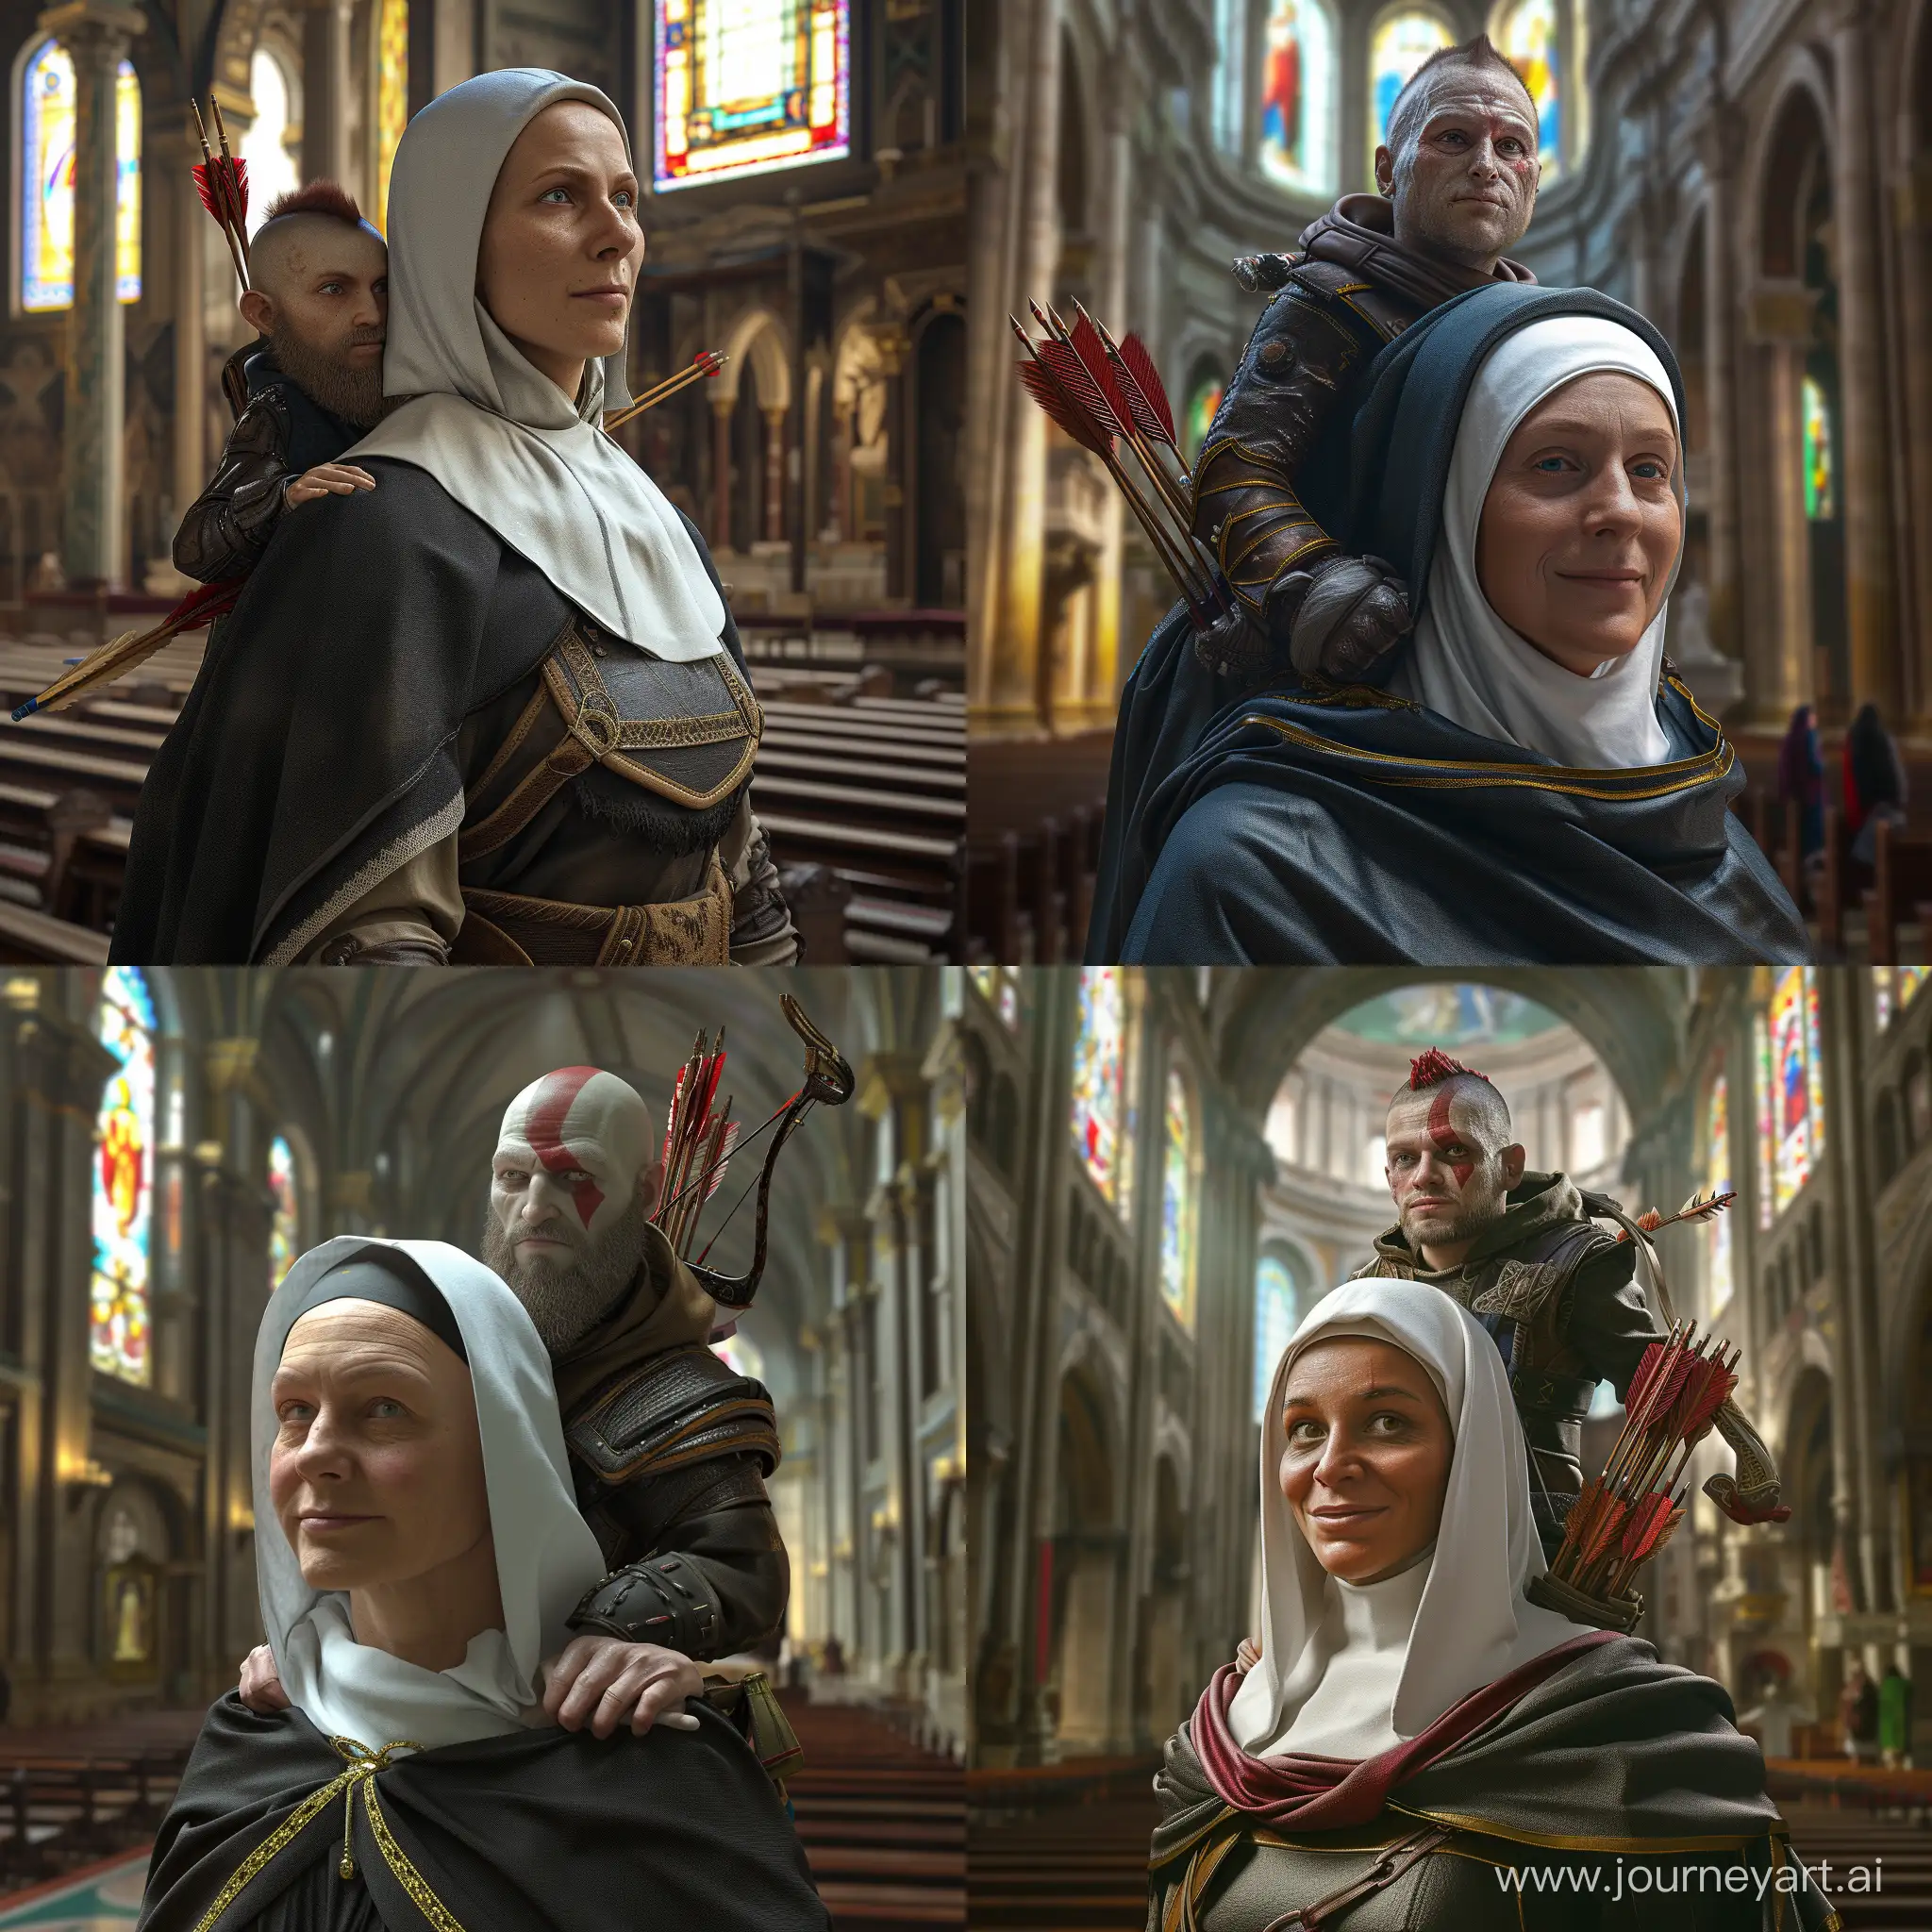 A nun with the face of Ishowspeed and Atreus from the game God of War: Ragnarok sitting on his shoulder are depicted in a highly realistic photographic style, with the scene set in a cathedral in Rome. The nun, embodying Ishowspeed's likeness, wears traditional nun attire and a serene expression on her face. Meanwhile, Atreus, a fictional character from the game, is portrayed as a lifelike figure perched on her shoulder, dressed in his iconic clothing and wielding his bow. The environment is grand and ornate, with stained glass windows casting colorful light into the cathedral and intricate architecture adding to the solemn atmosphere. The art style prioritizes meticulous detail and lifelike rendering, capturing the texture of the nun's habit and the intricate details of Atreus' costume with remarkable authenticity. The camera angle is carefully chosen to capture the scene from a reverent perspective, emphasizing the spiritual significance of the moment. Rendered with high resolution and naturalistic lighting to enhance the realism of the scene.